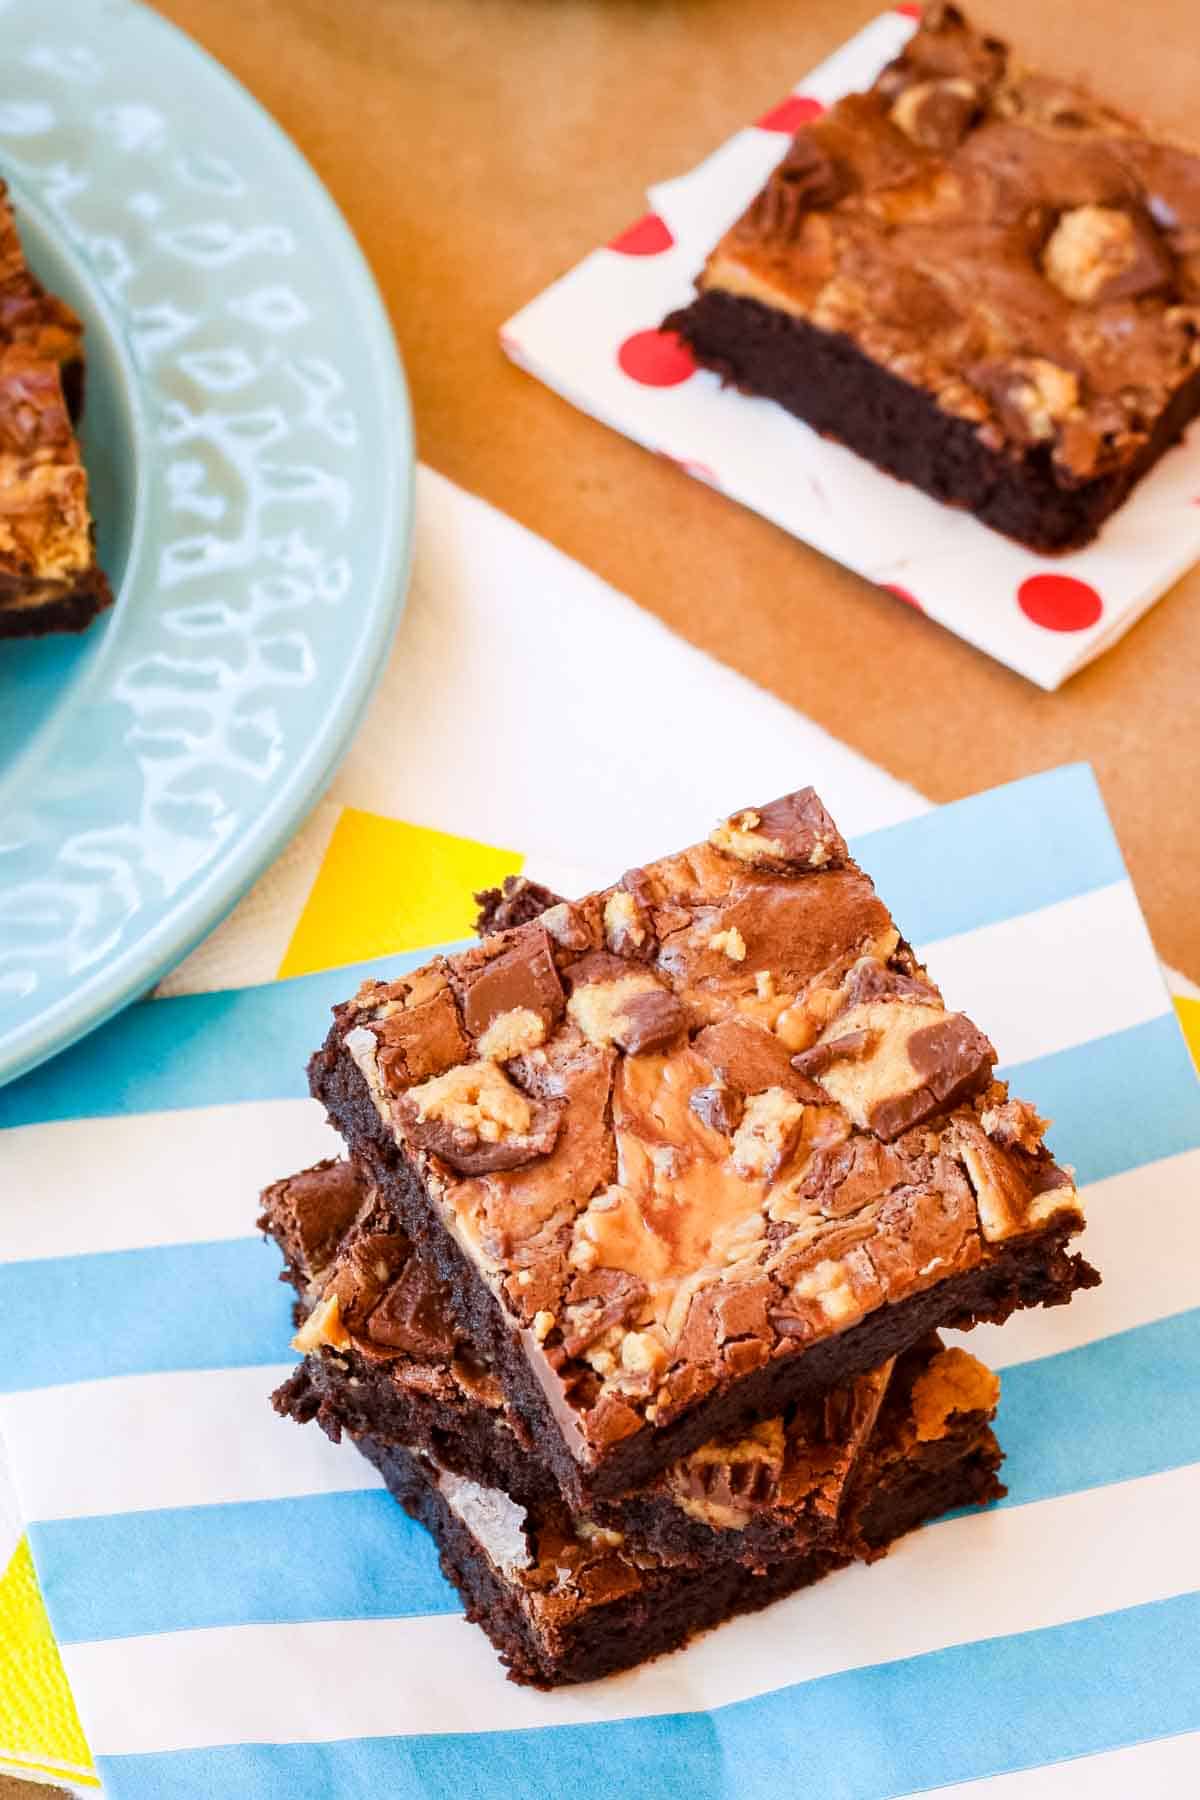 Three peanut butter brownies stacked on a blue and white striped napkin, with a second brownie on a polka dot napkin in the background.